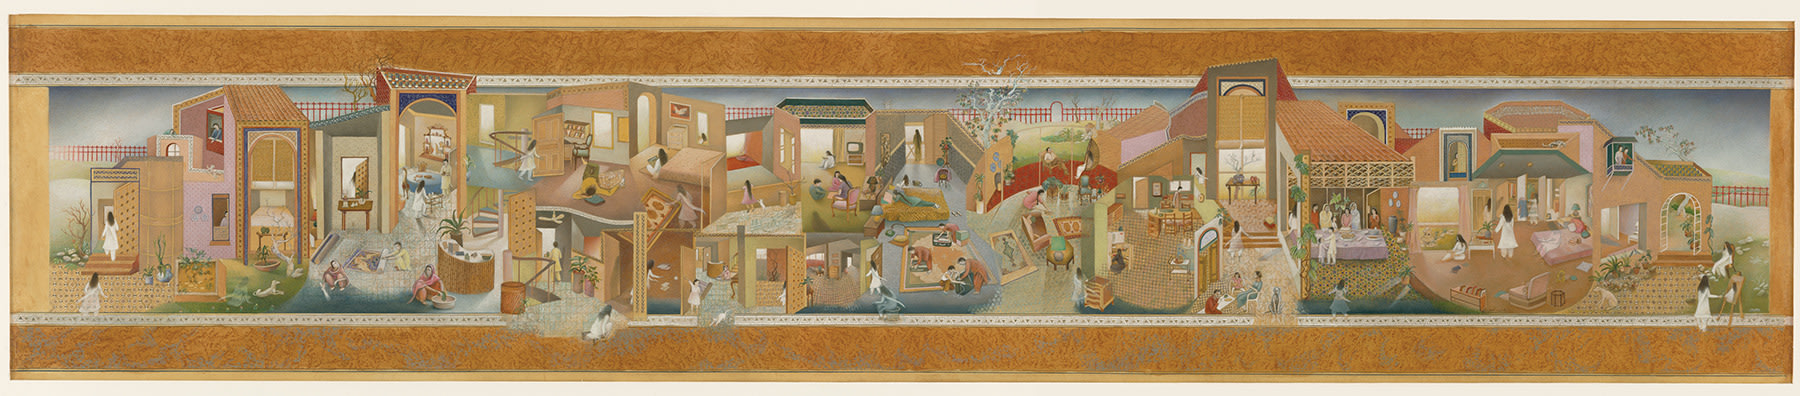 The Scroll, 1991-92, Vegetable color, dry pigment, watercolor, and tea on Wasli paper